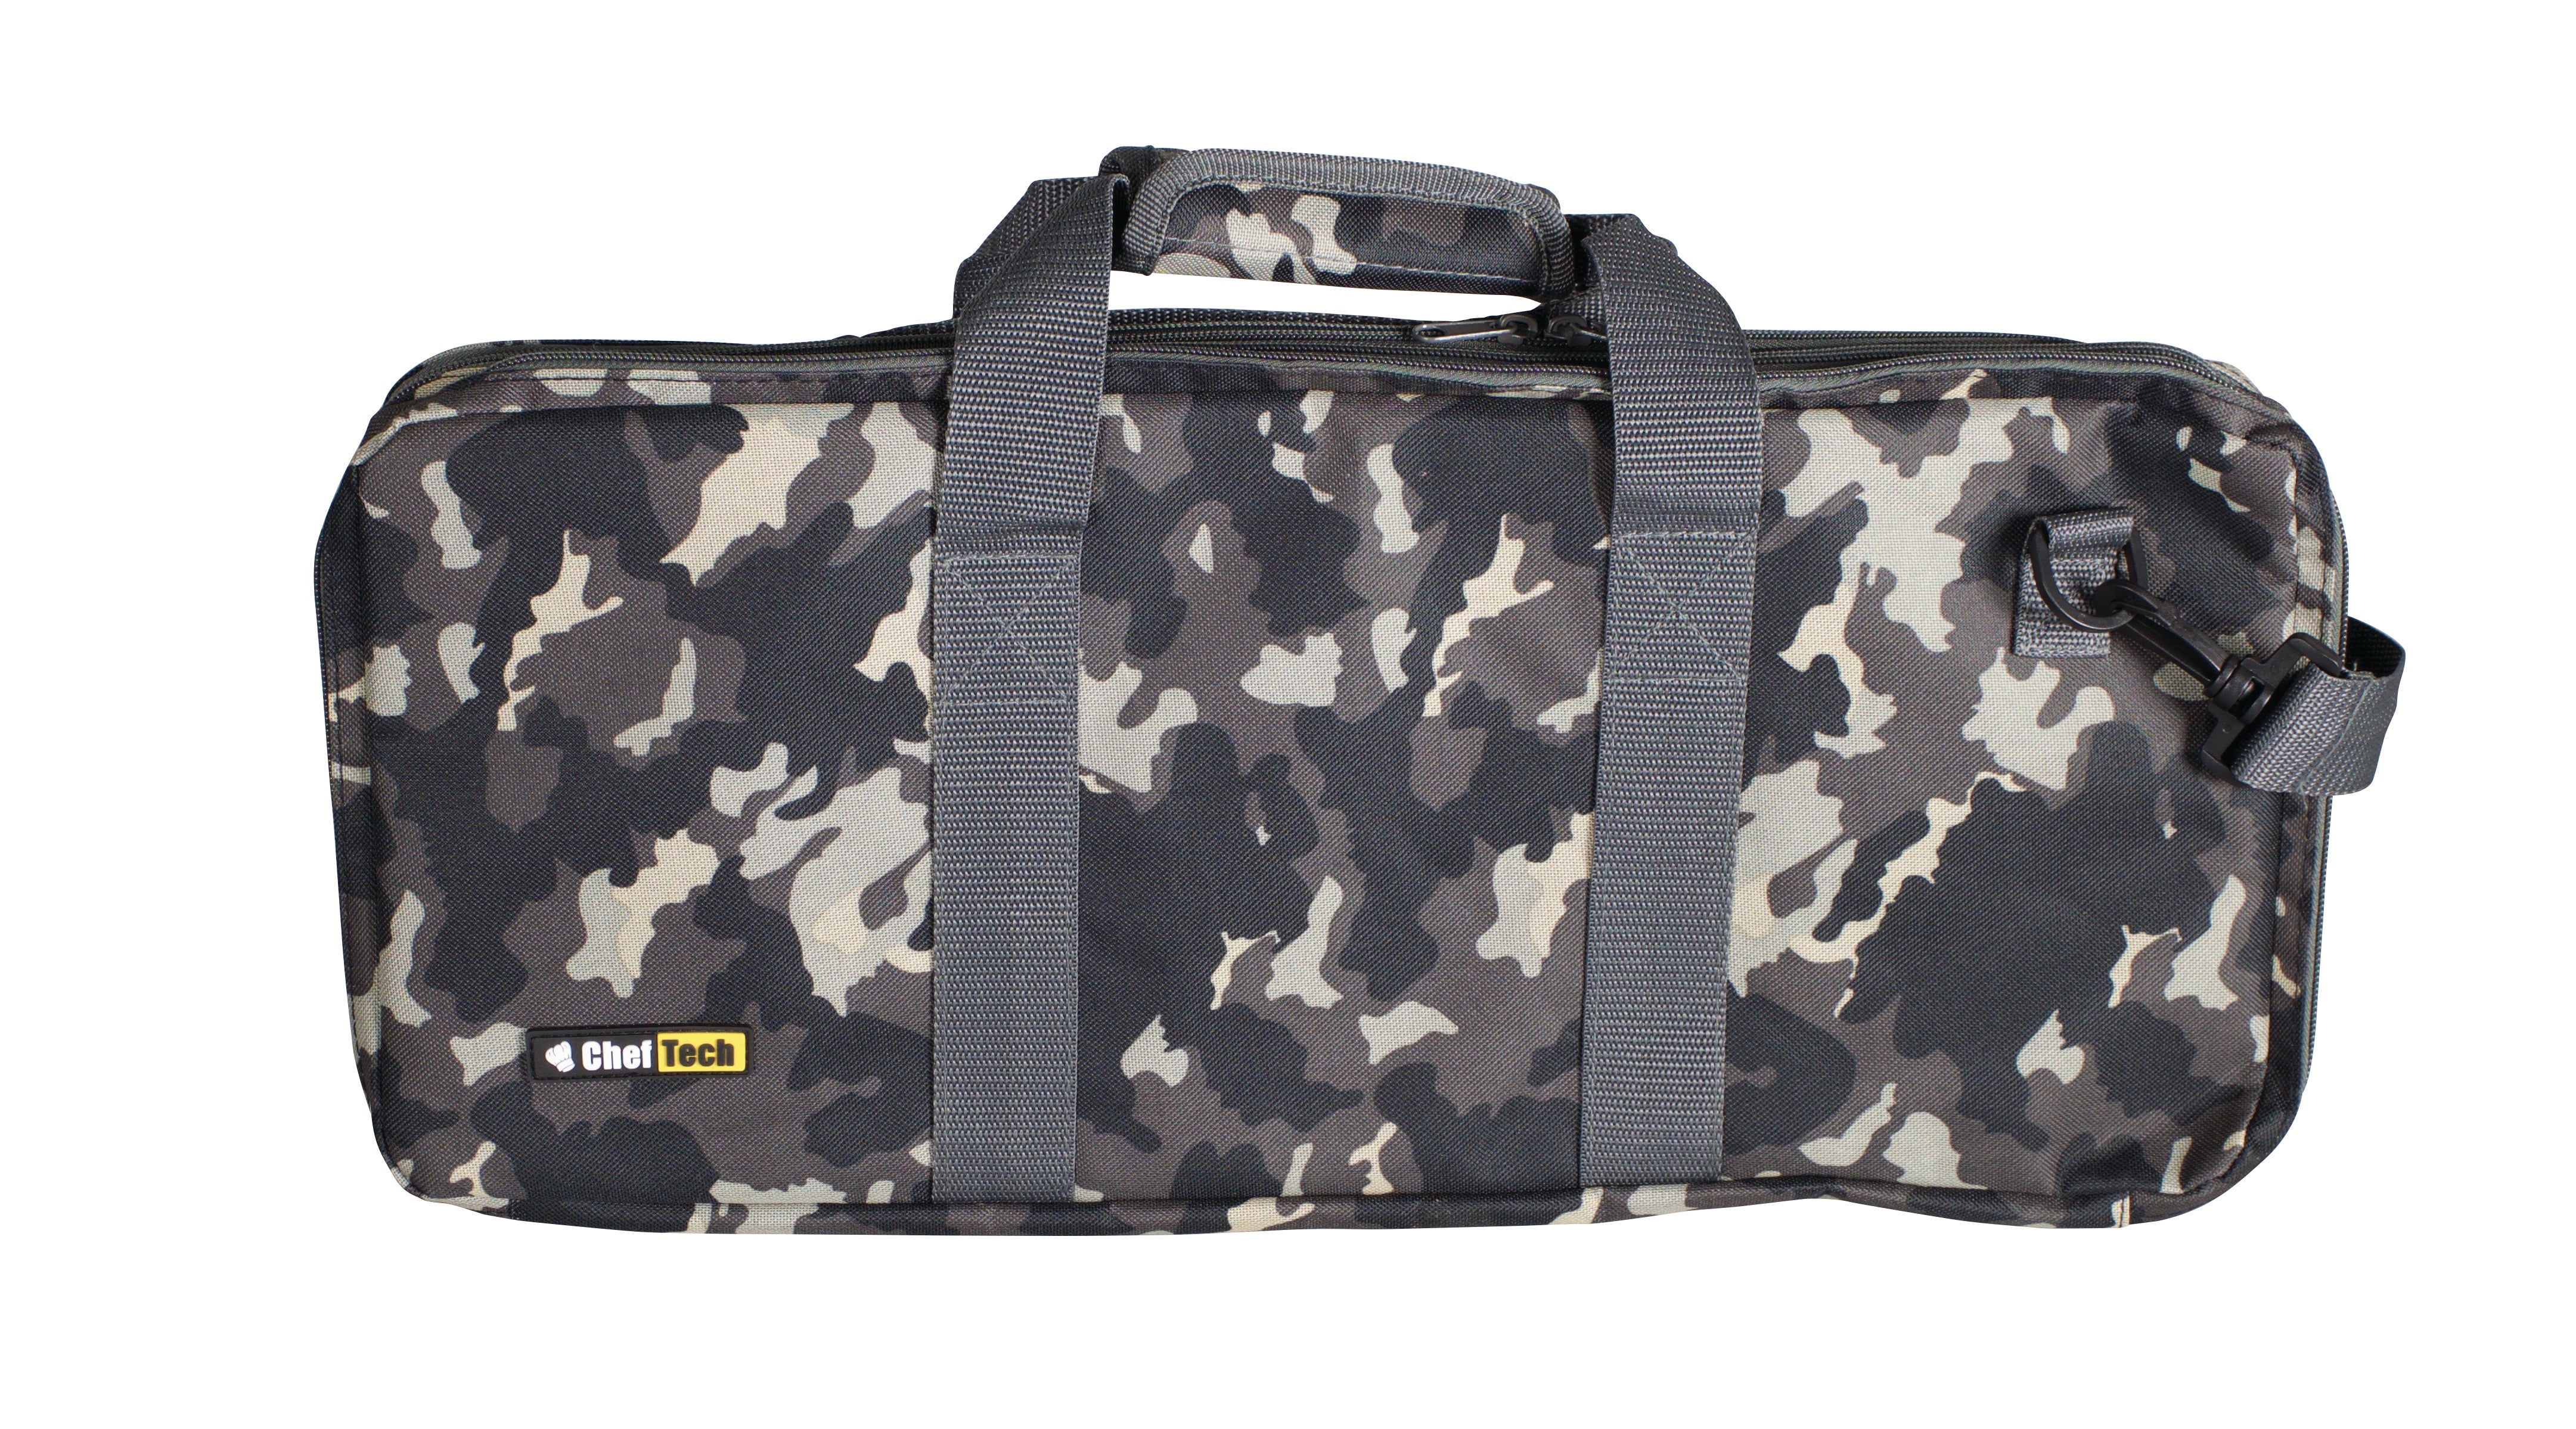 ChefTech Knife Chef Roll Bag Fits 18 Pieces with Handles - Camo